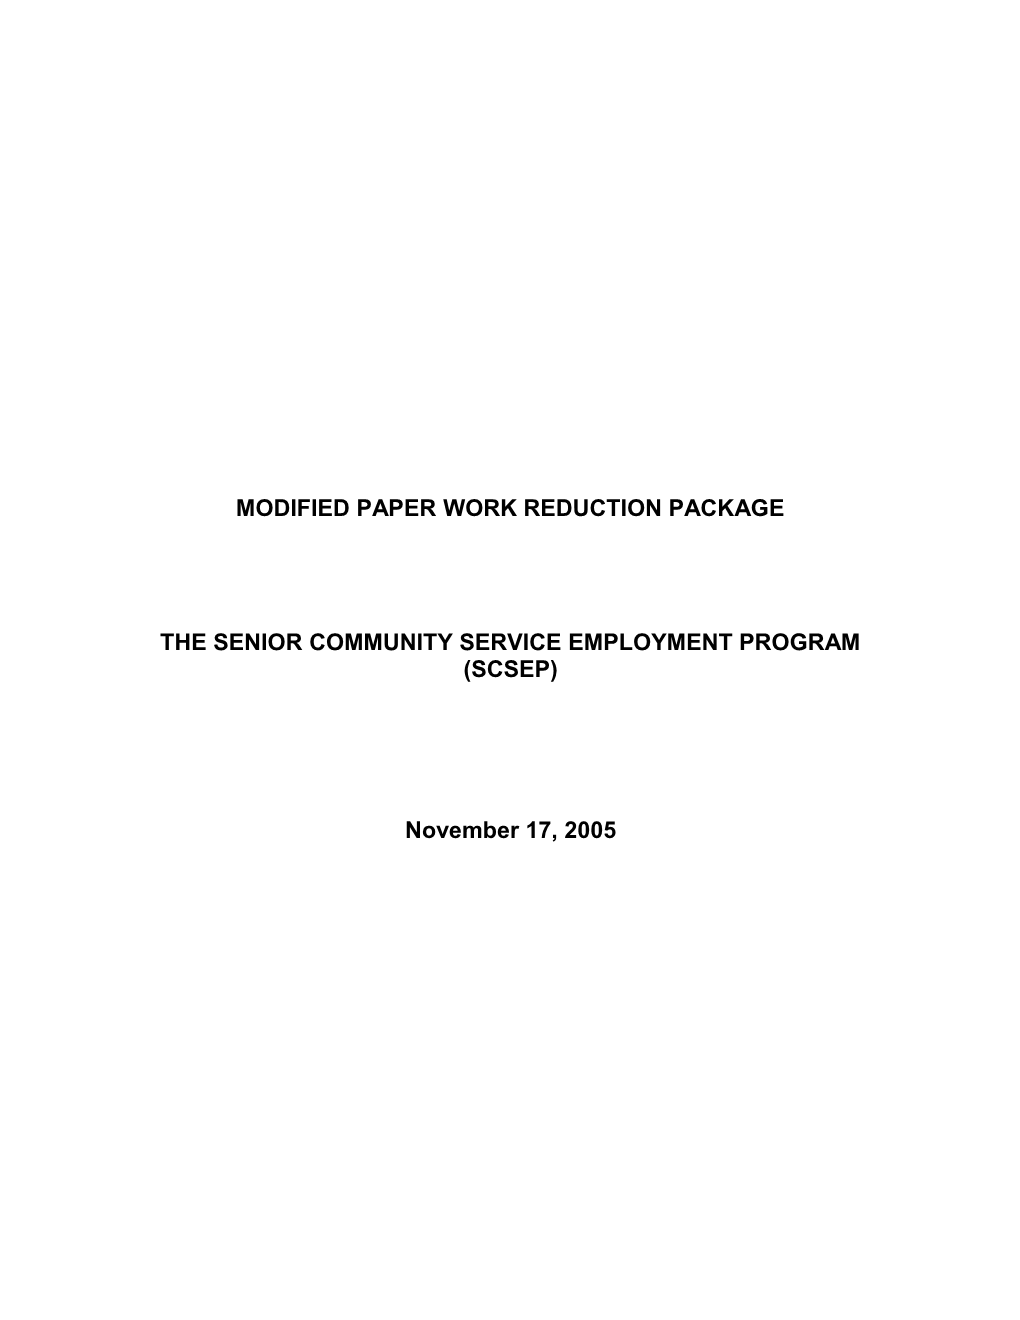 Modified Paper Work Reduction Package